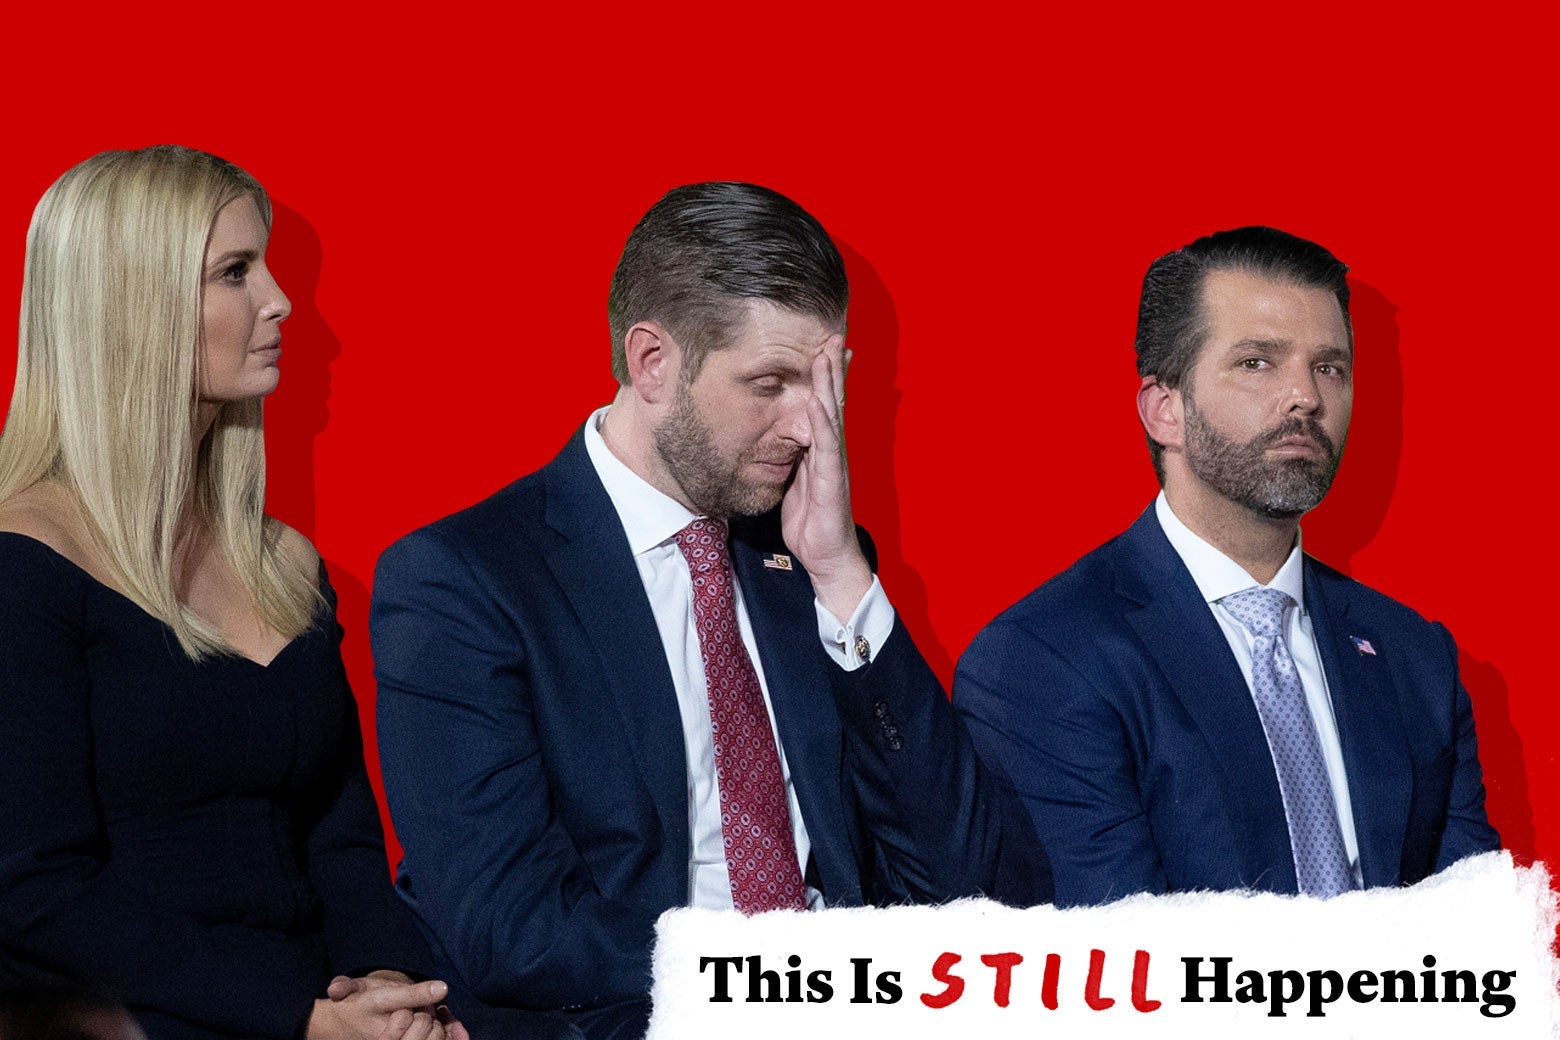 Ivanka Trump, Eric Trump with his hand to his face, and Donald Trump Jr.